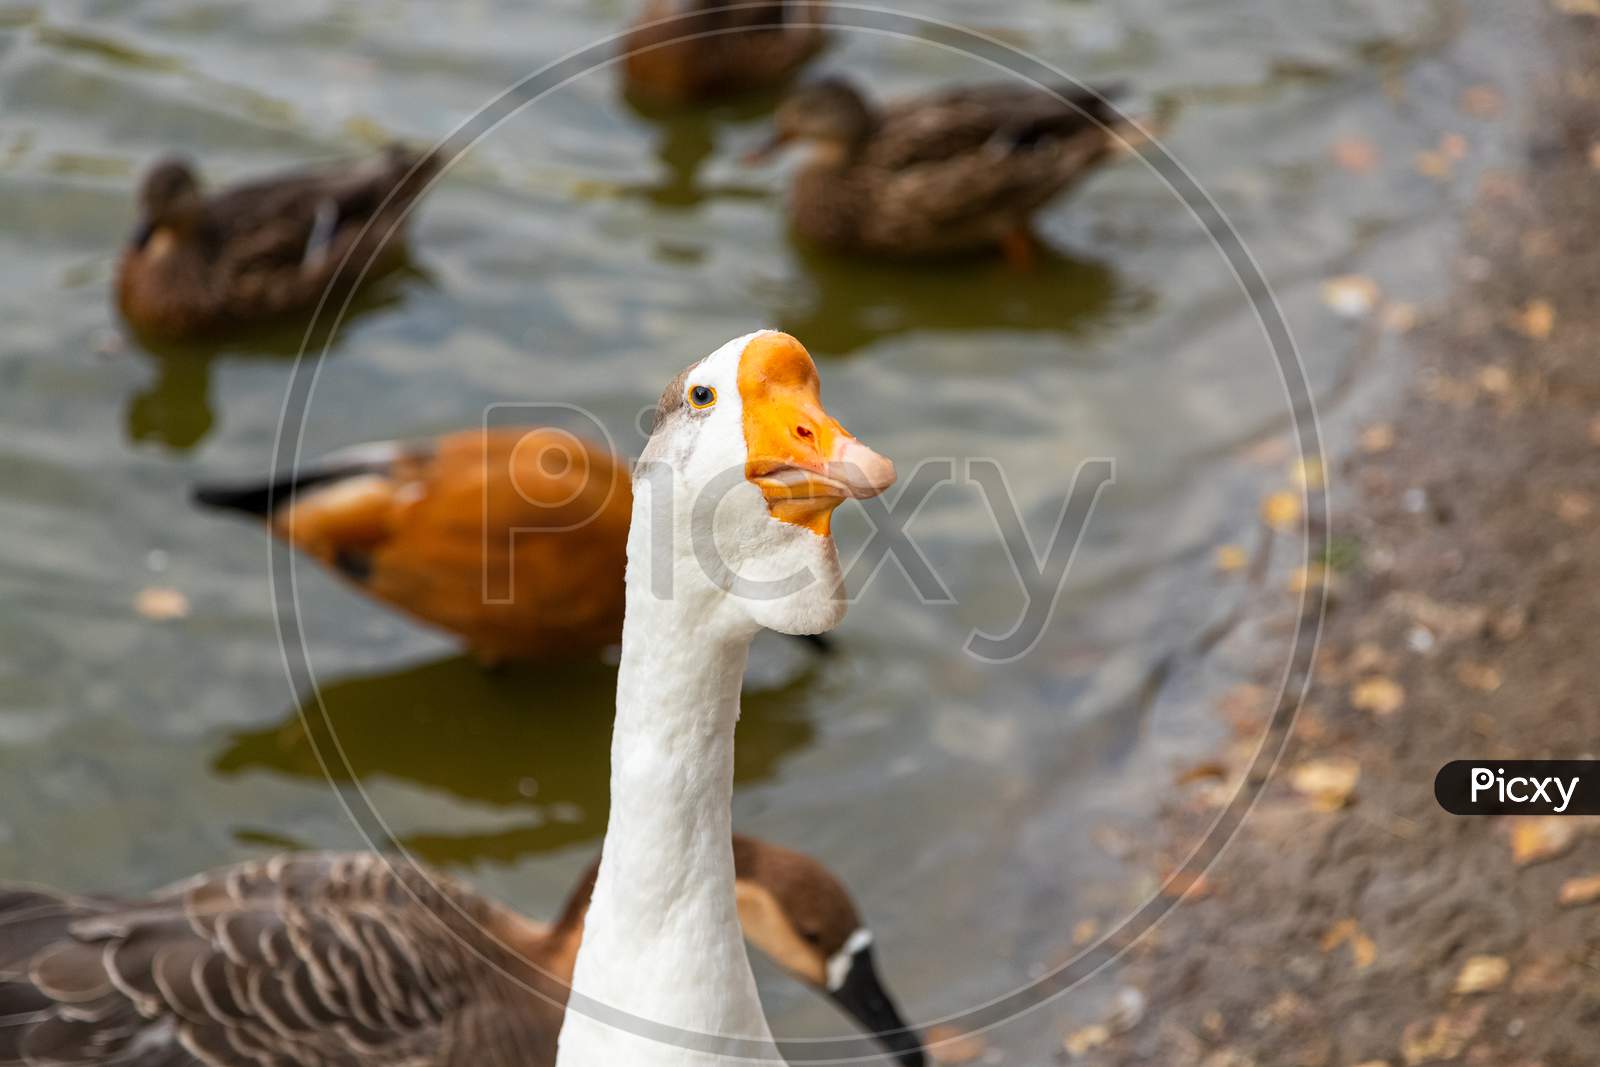 An Adult White Goose With A Brown Crest And A Yellow Beak Looks At The Camera Against The Background Of A Pond With Floating Brown Ducks. Portrait Of A Domestic Goose